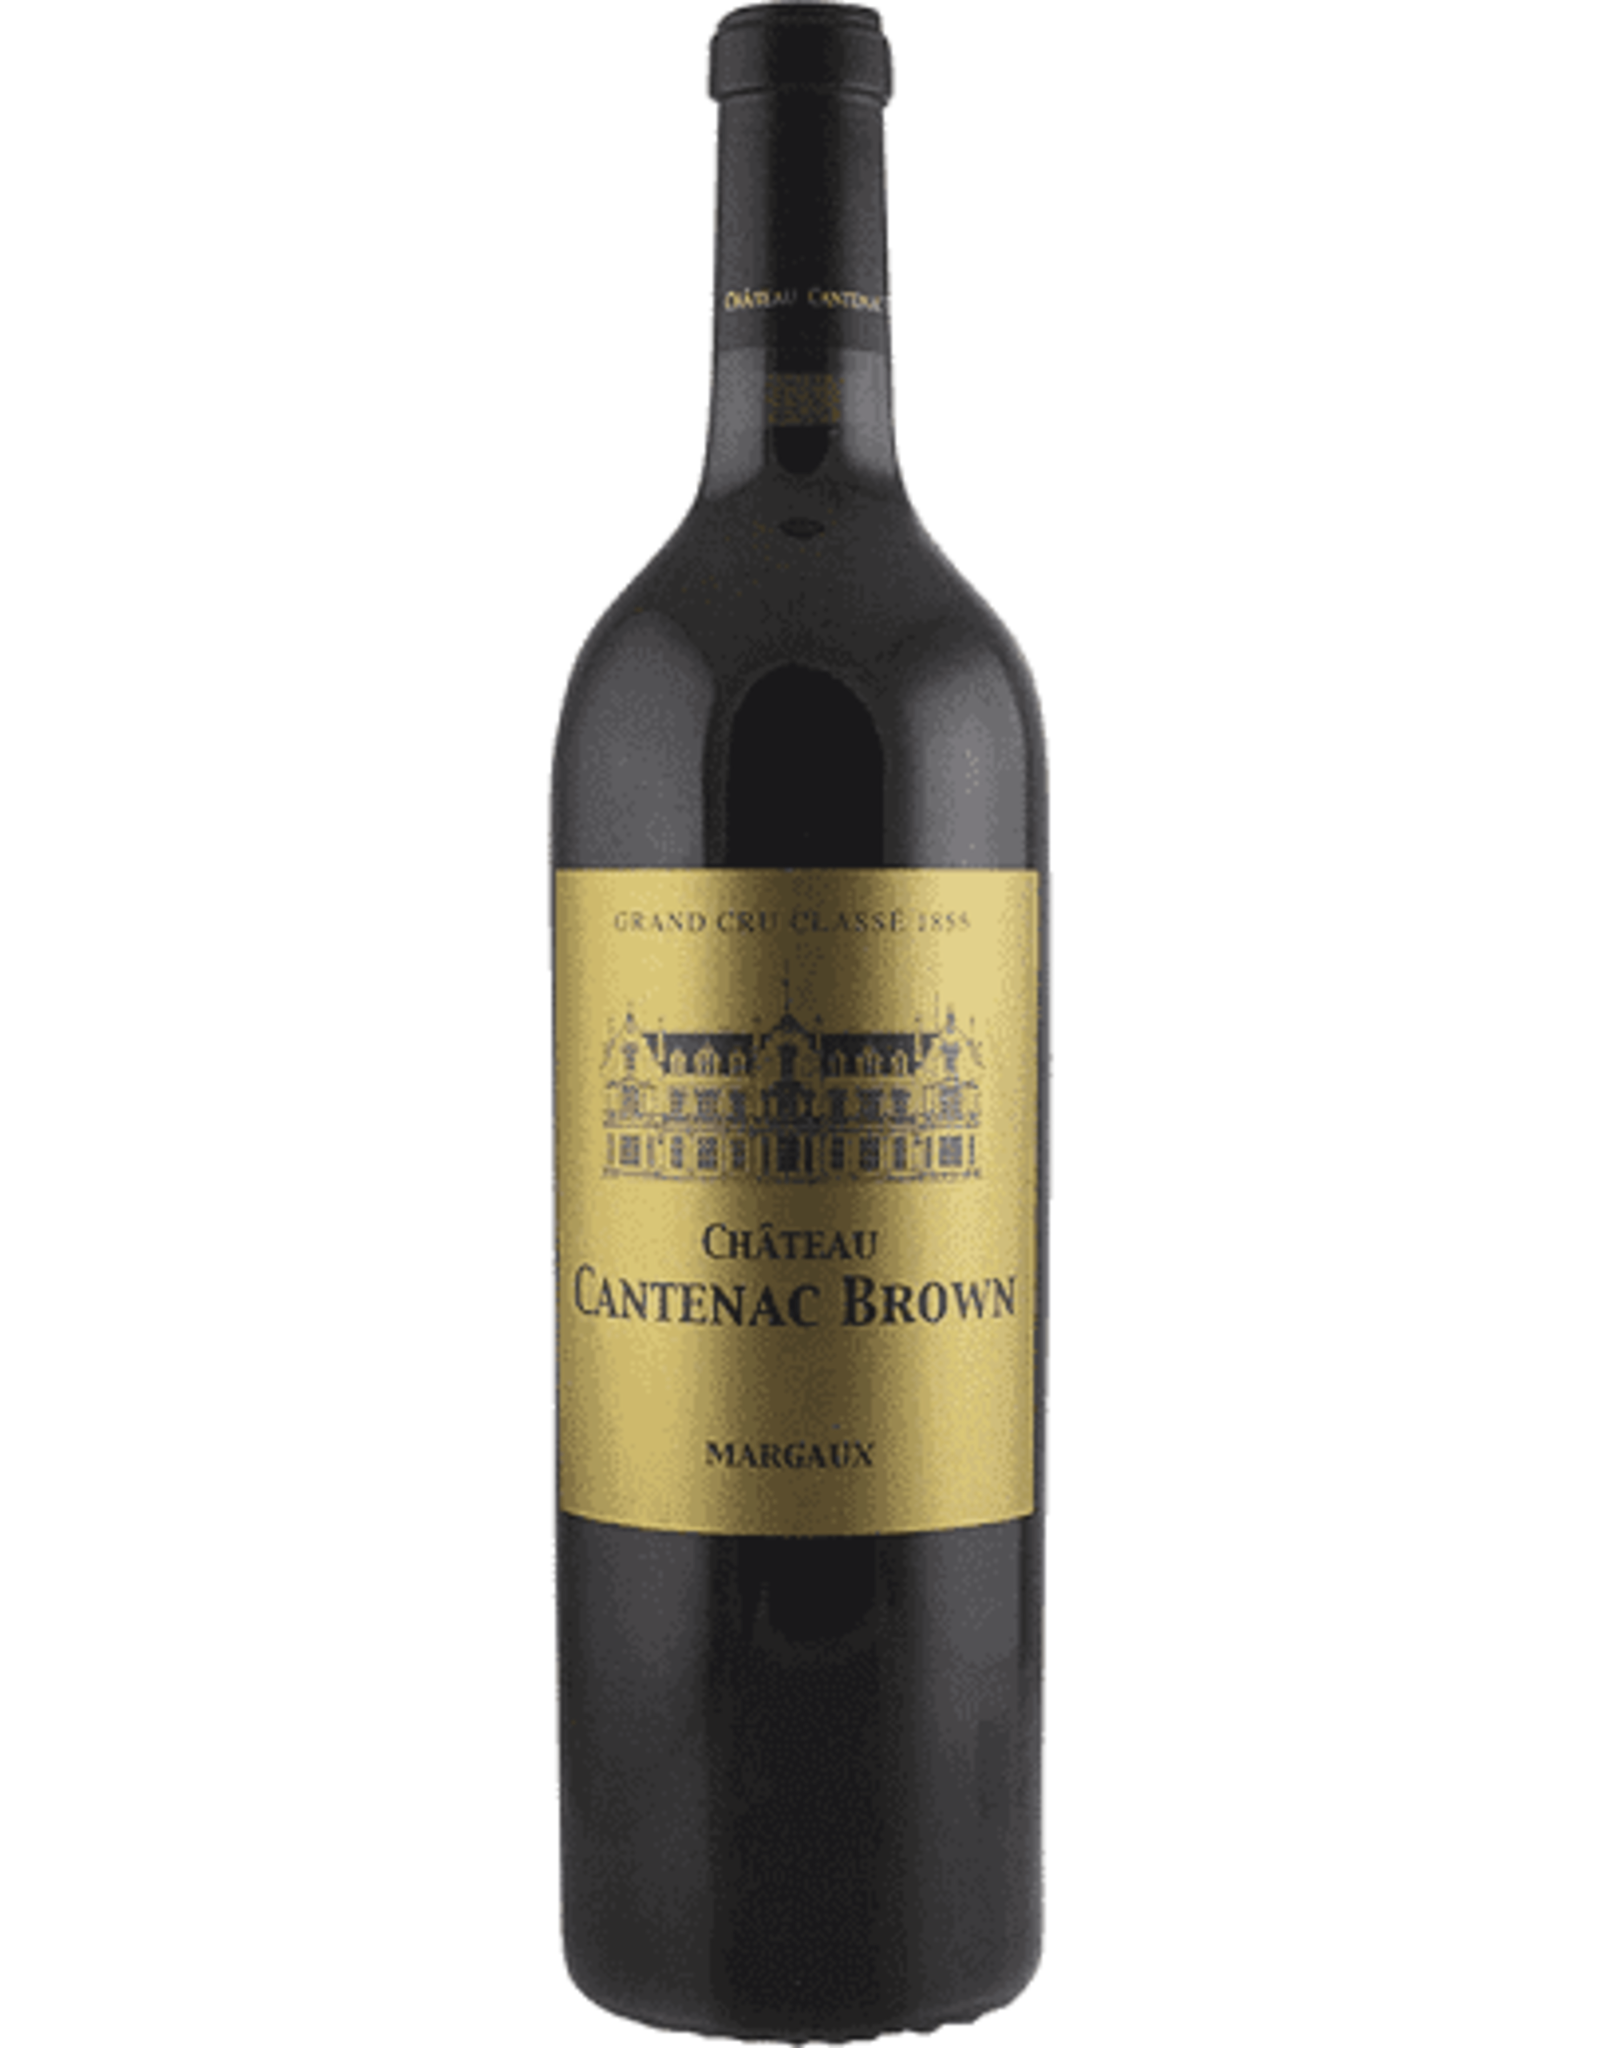 Chateau Cantenac Brown, Margaux 2017